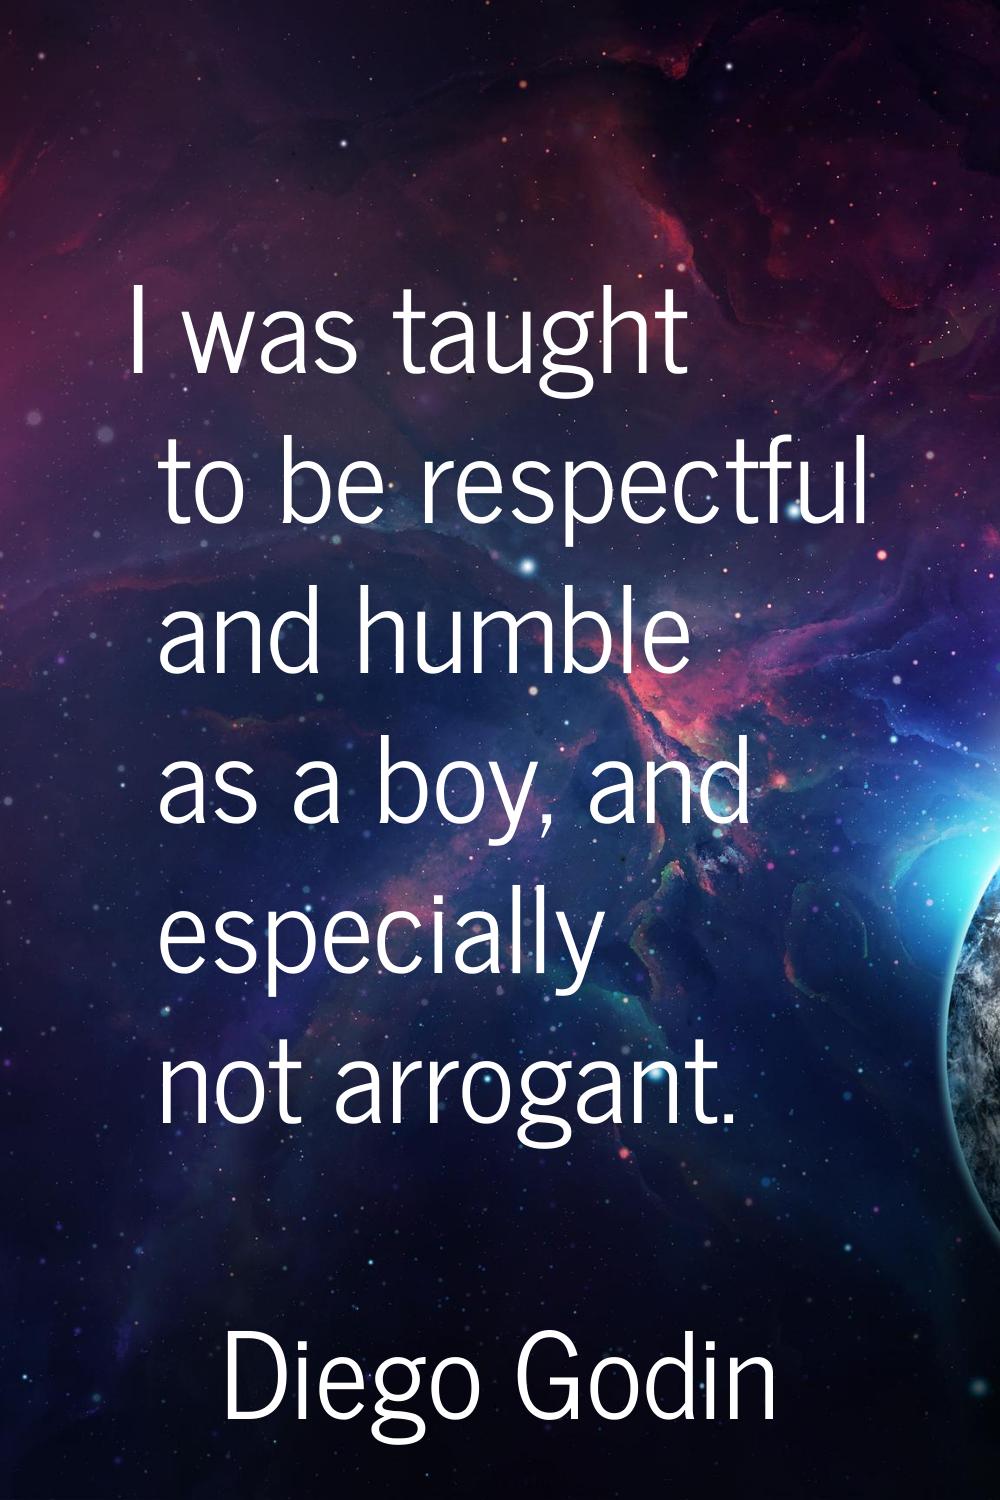 I was taught to be respectful and humble as a boy, and especially not arrogant.